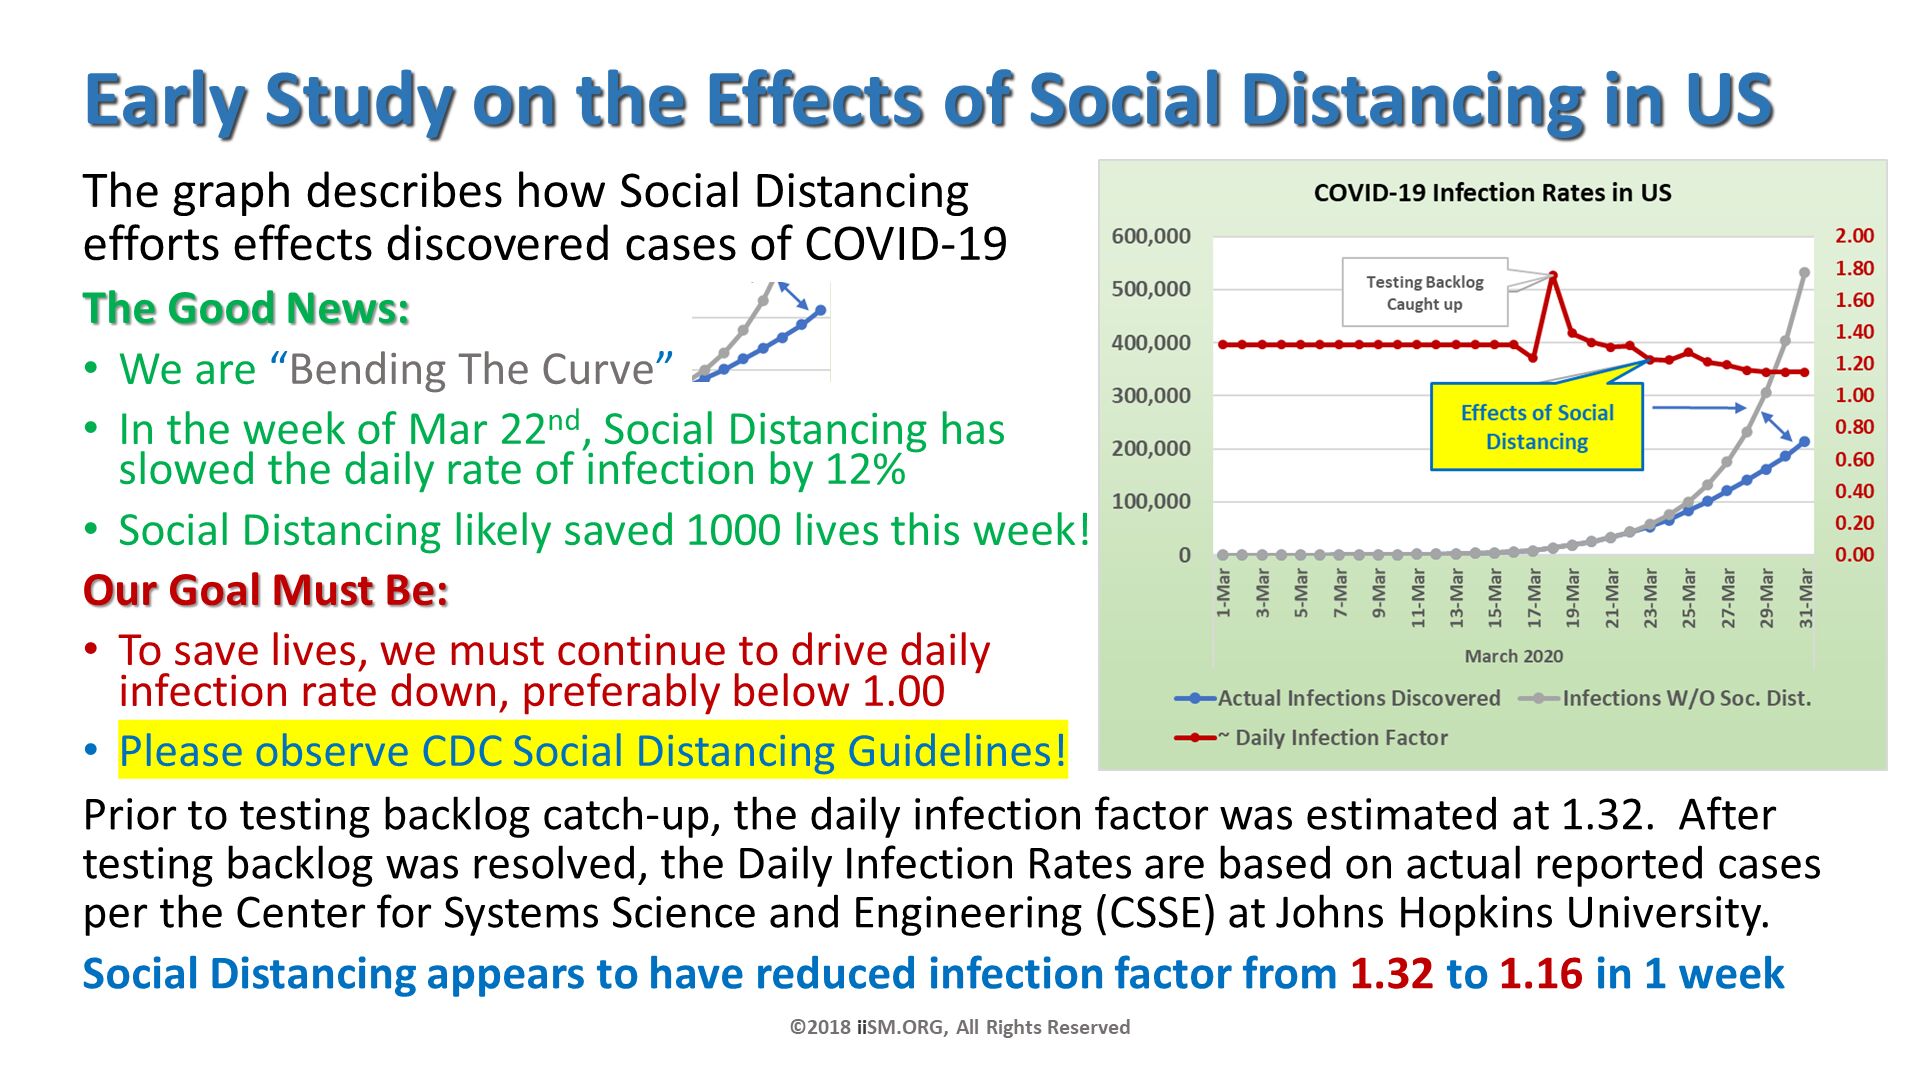 Early Study on the Effects of Social Distancing in US. The graph describes how Social Distancing efforts effects discovered cases of COVID-19  
The Good News:
We are “Bending The Curve” 
In the week of Mar 22nd, Social Distancing has slowed the daily rate of infection by 12%
Social Distancing likely saved 1000 lives this week!
Our Goal Must Be:
To save lives, we must continue to drive daily infection rate down, preferably below 1.00
Please observe CDC Social Distancing Guidelines!. ©2018 iiSM.ORG, All Rights Reserved. Prior to testing backlog catch-up, the daily infection factor was estimated at 1.32.  After testing backlog was resolved, the Daily Infection Rates are based on actual reported cases per the Center for Systems Science and Engineering (CSSE) at Johns Hopkins University.
Social Distancing appears to have reduced infection factor from 1.32 to 1.16 in 1 week. 